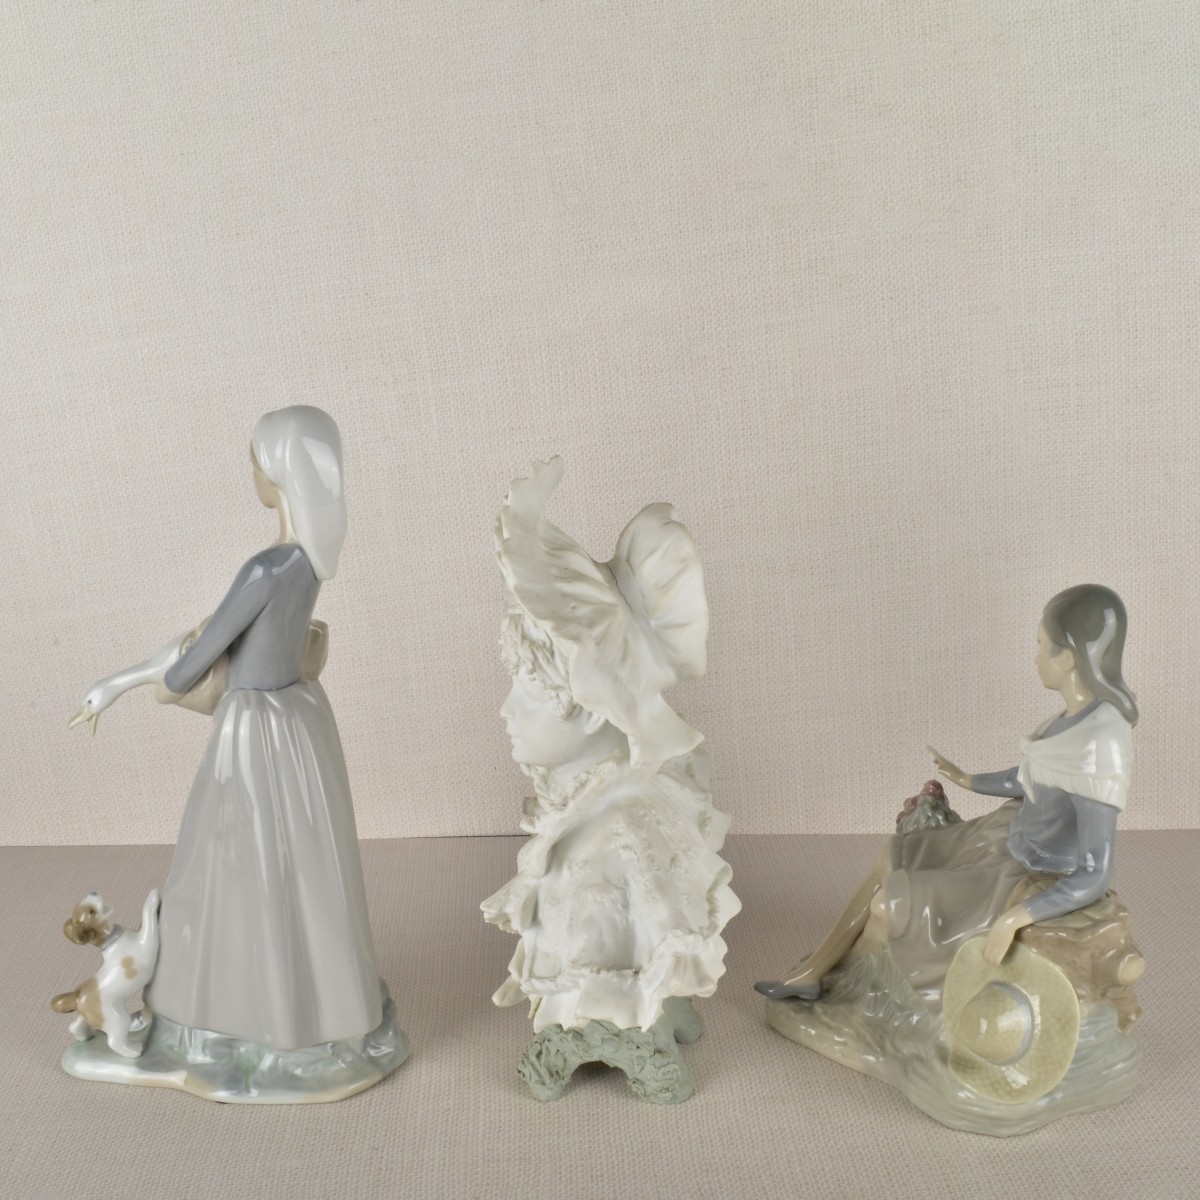 Three Statues Porcelain and Bisque